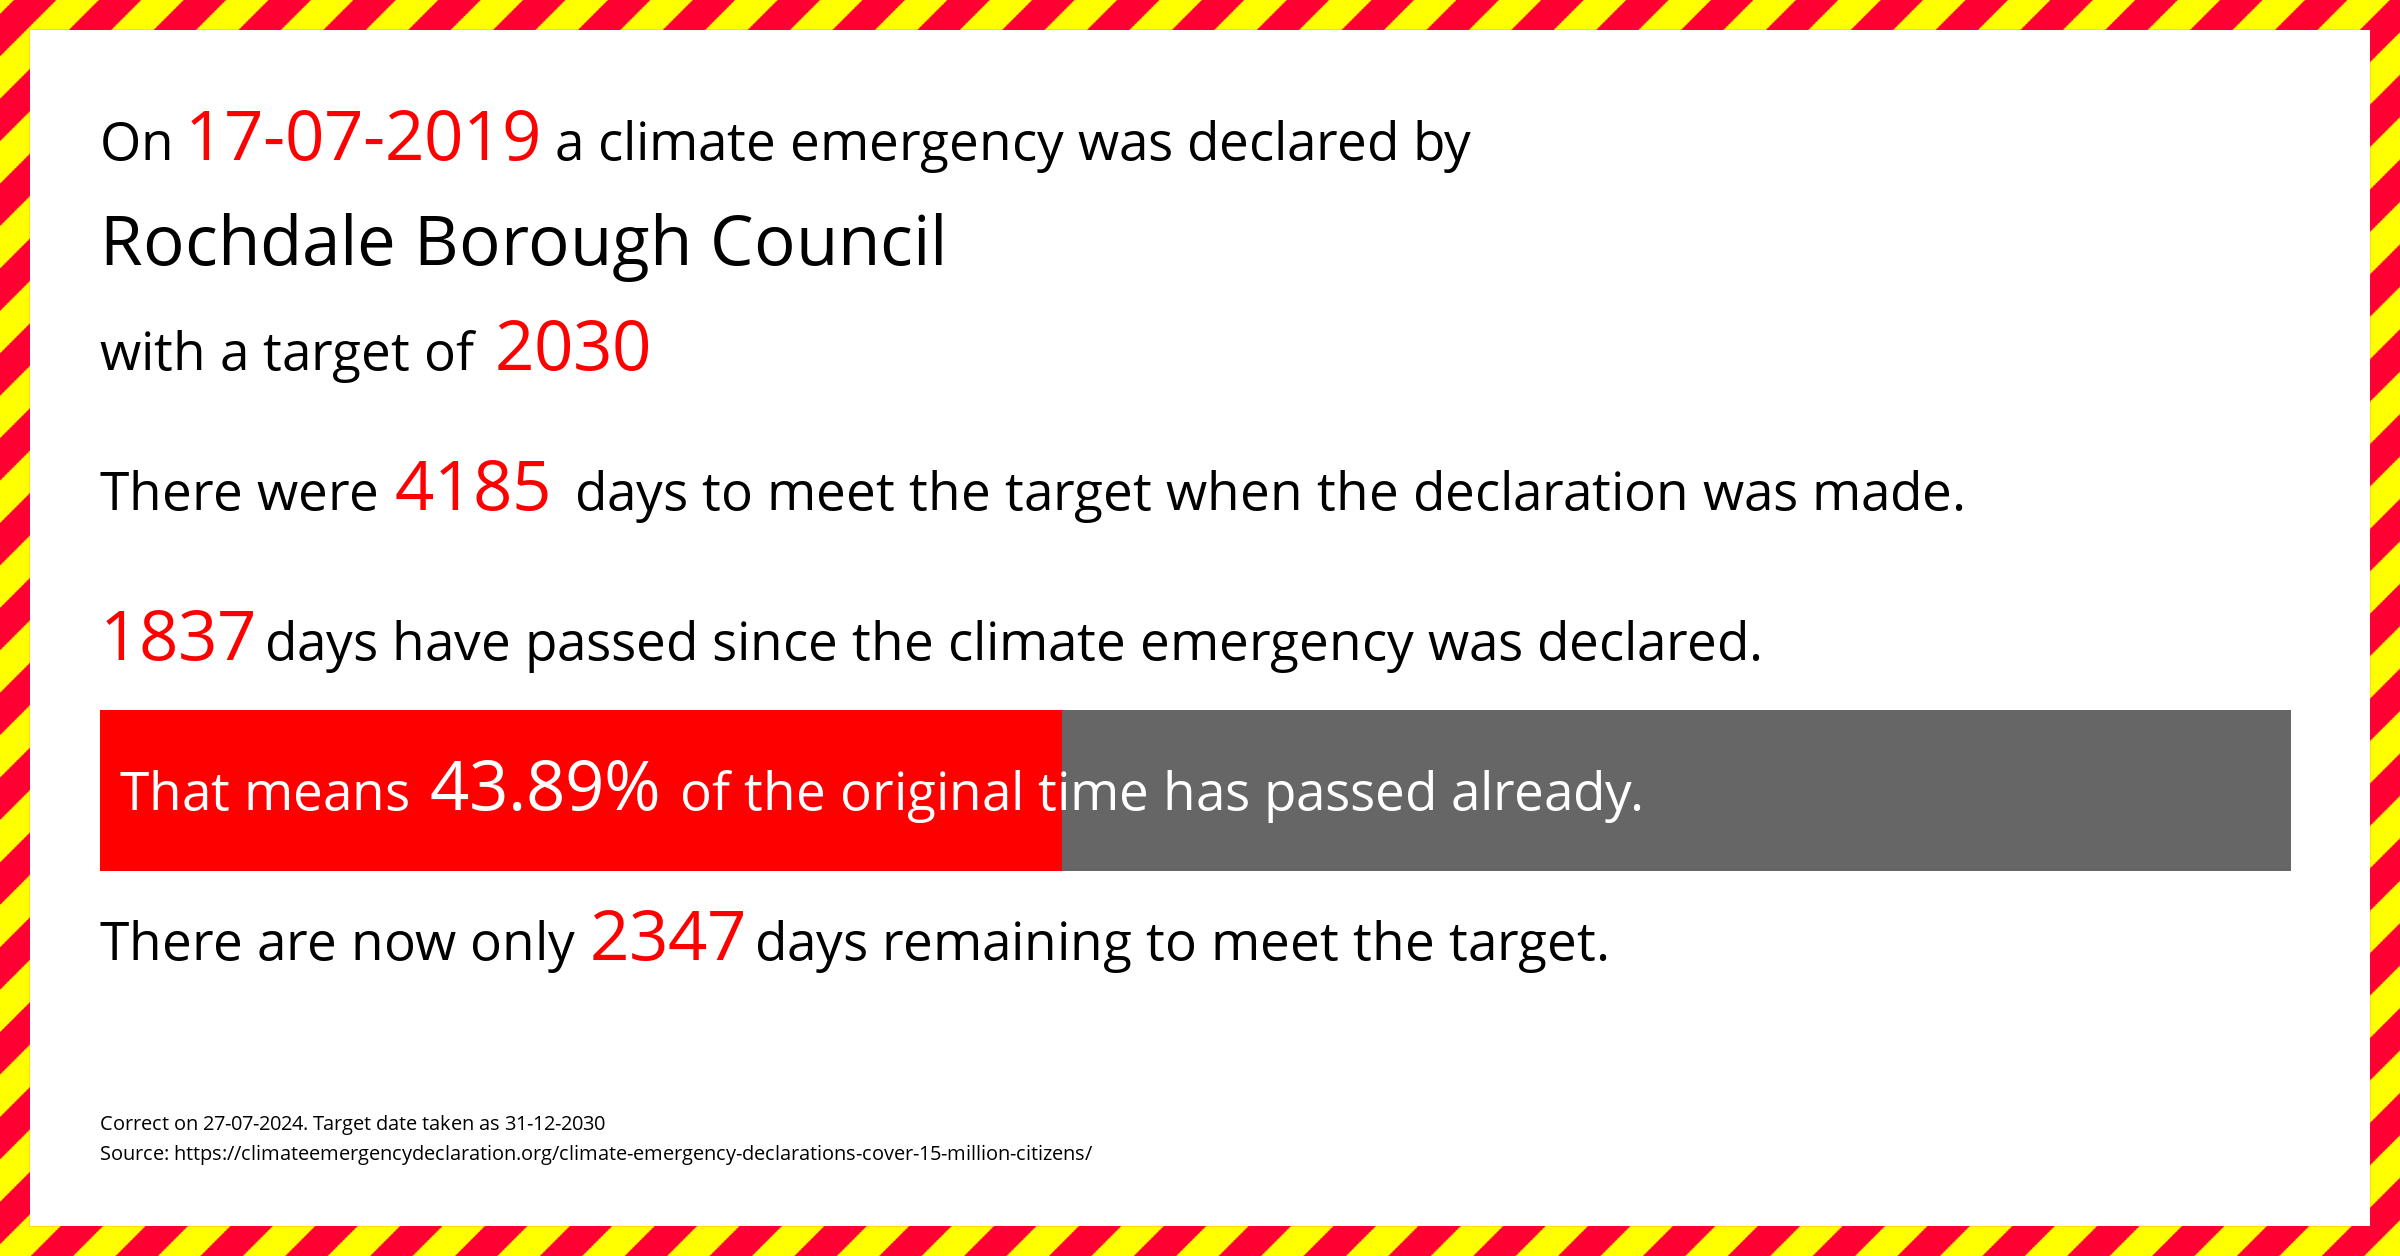 Rochdale Borough Council declared a Climate emergency on Wednesday 17th July 2019, with a target of 2030.